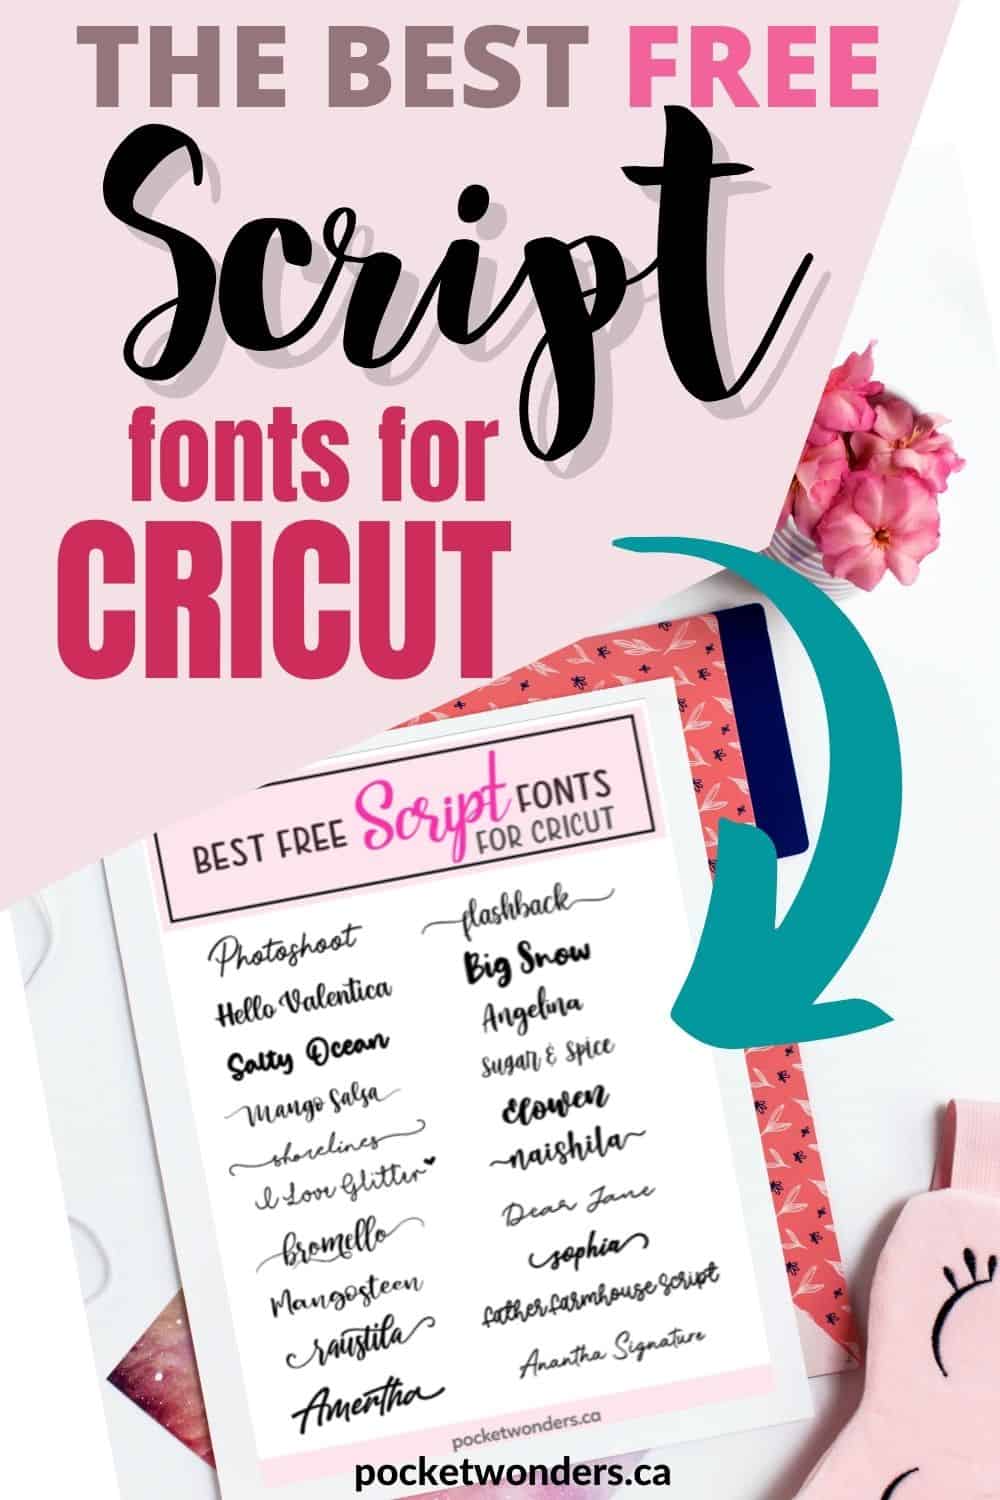 Browser Fonts - Best Font For Browser by Sidekick